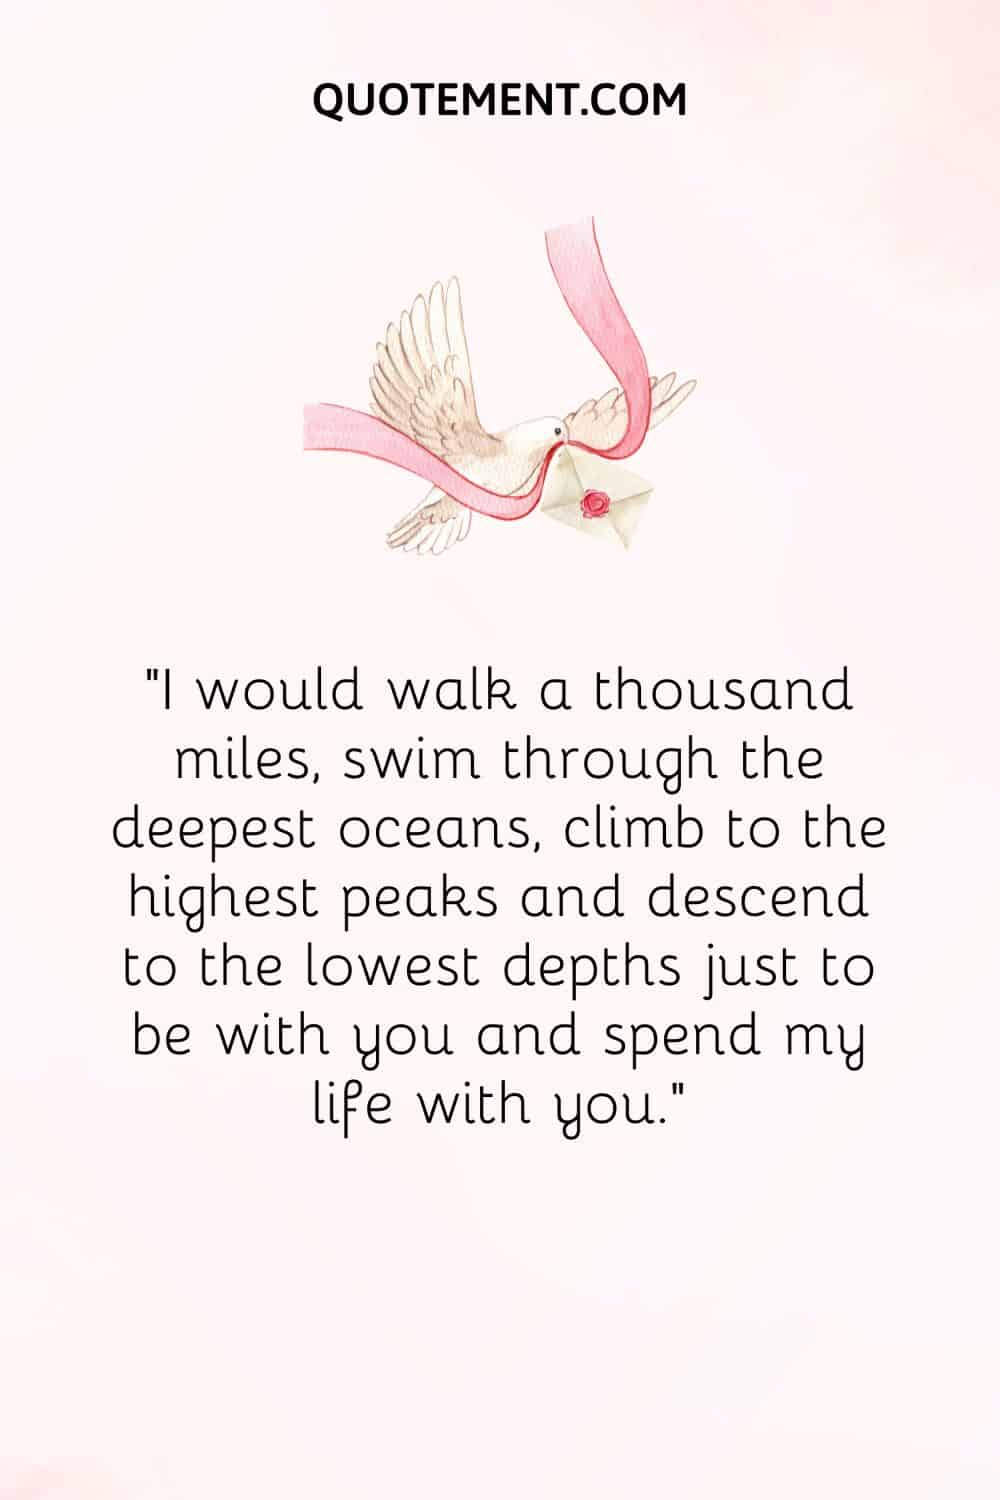 “I would walk a thousand miles, swim through the deepest oceans, climb to the highest peaks, and descend to the lowest depths just to be with you and spend my life with you.”